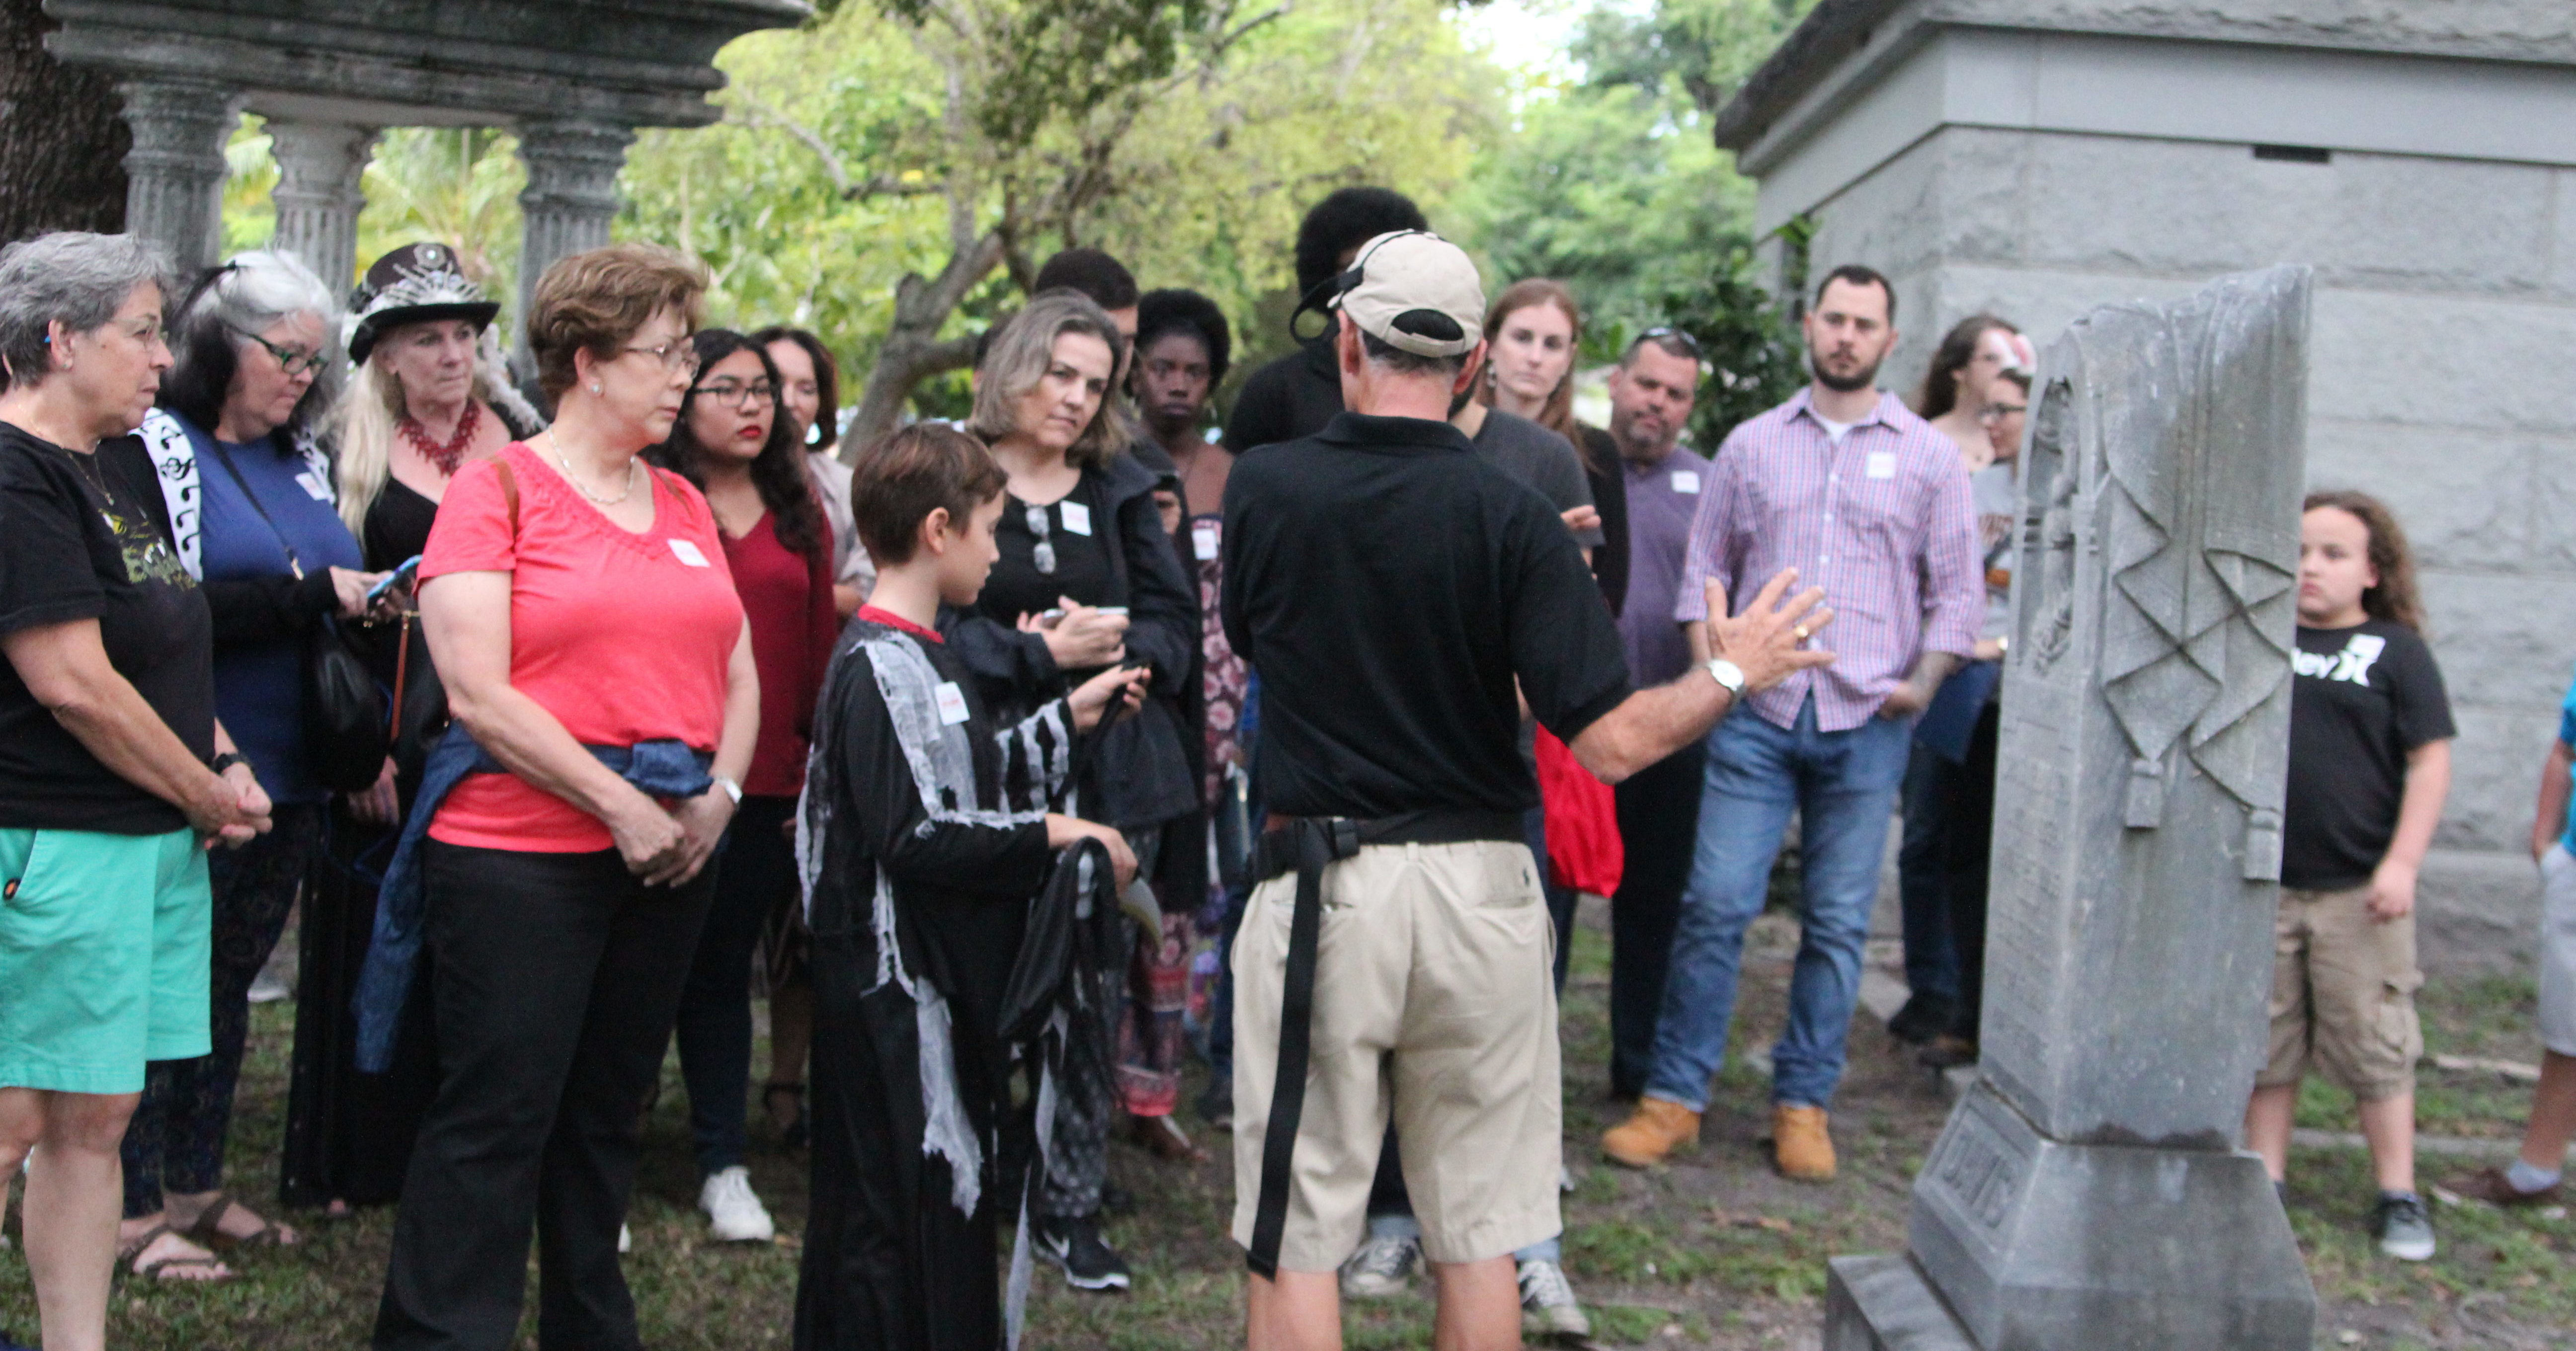 Annual Ghosts of Miami City Cemetery with Dr. George – Early Bird